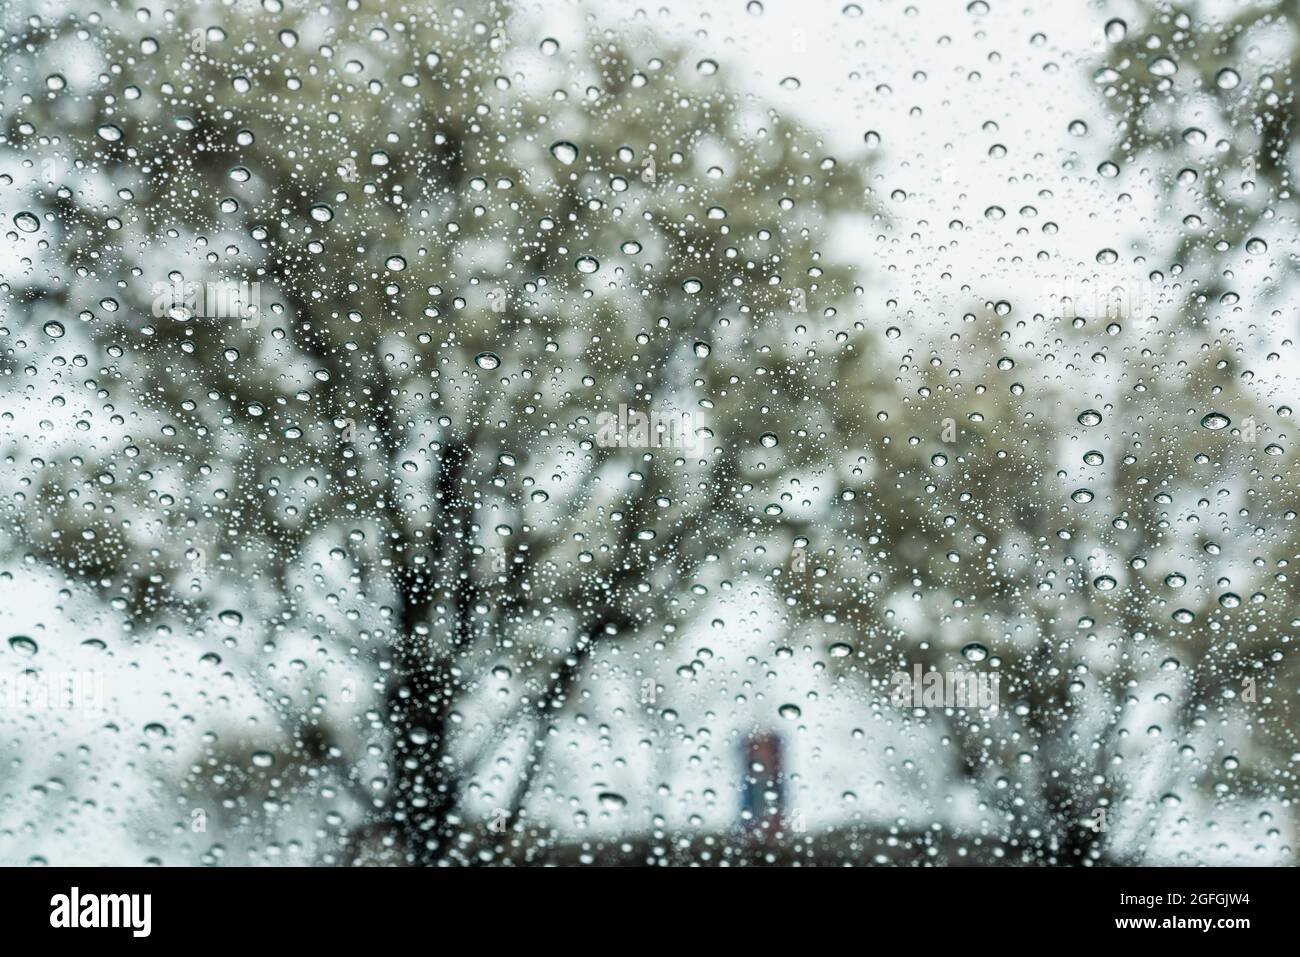 Raindrops on a window; blooming trees in the background, California Stock Photo